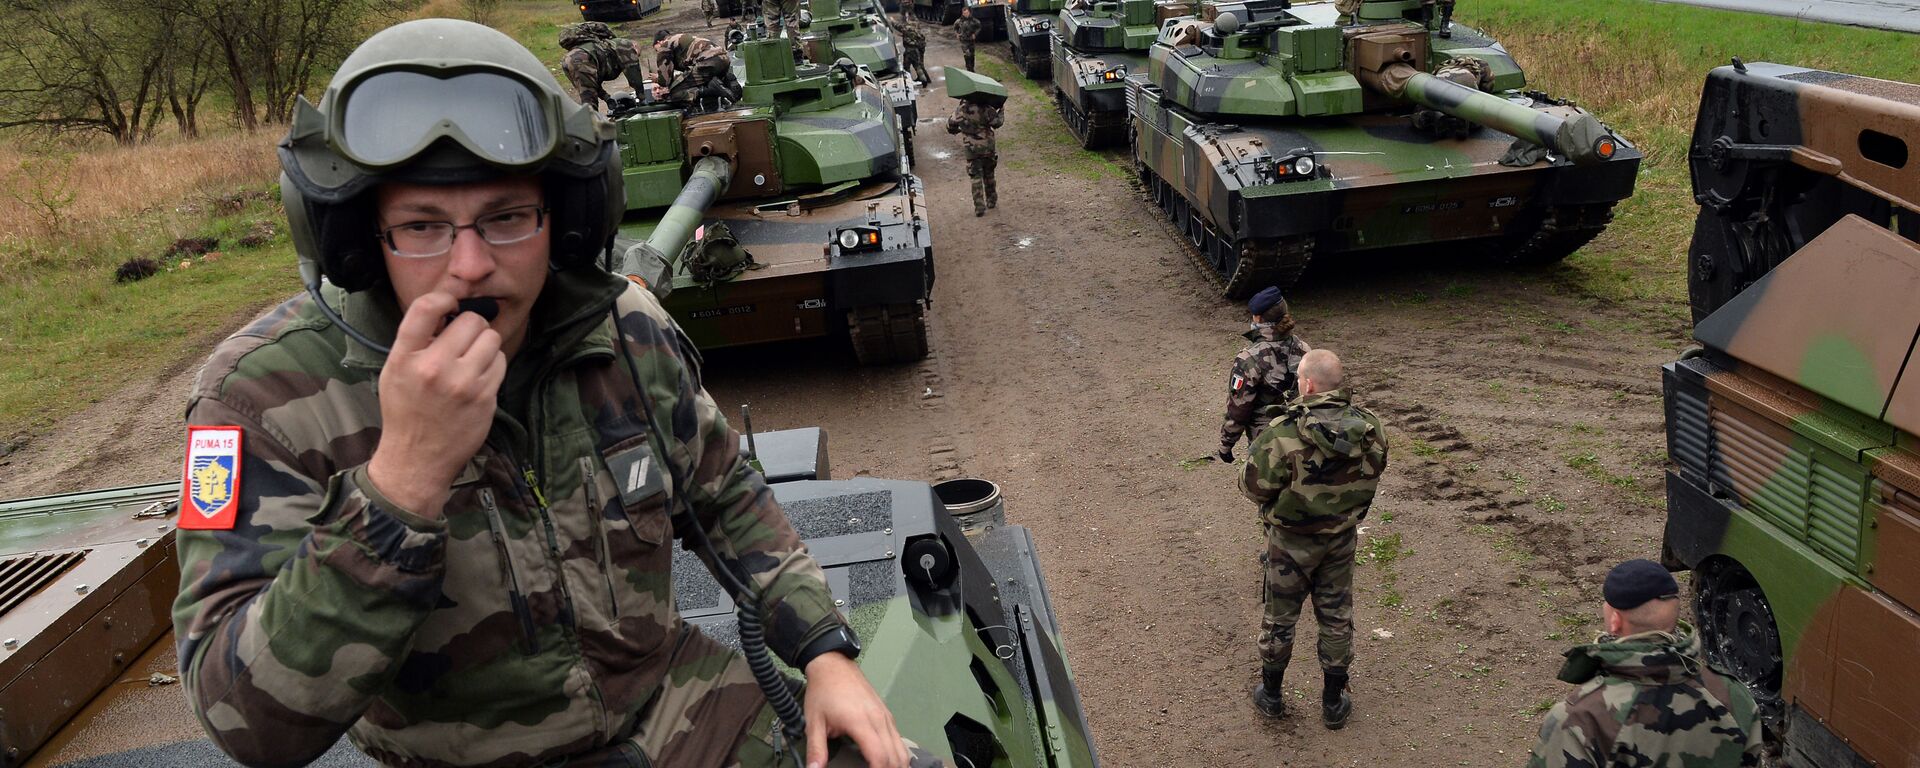 French soldiers unload tanks from a train in Drawsko Pomorskie, northern Poland on 28 April 2015. Fifteen French tanks and 270 soldiers went to Drawsko Pomorskie for a seven-week-long exercise. - Sputnik International, 1920, 05.09.2021